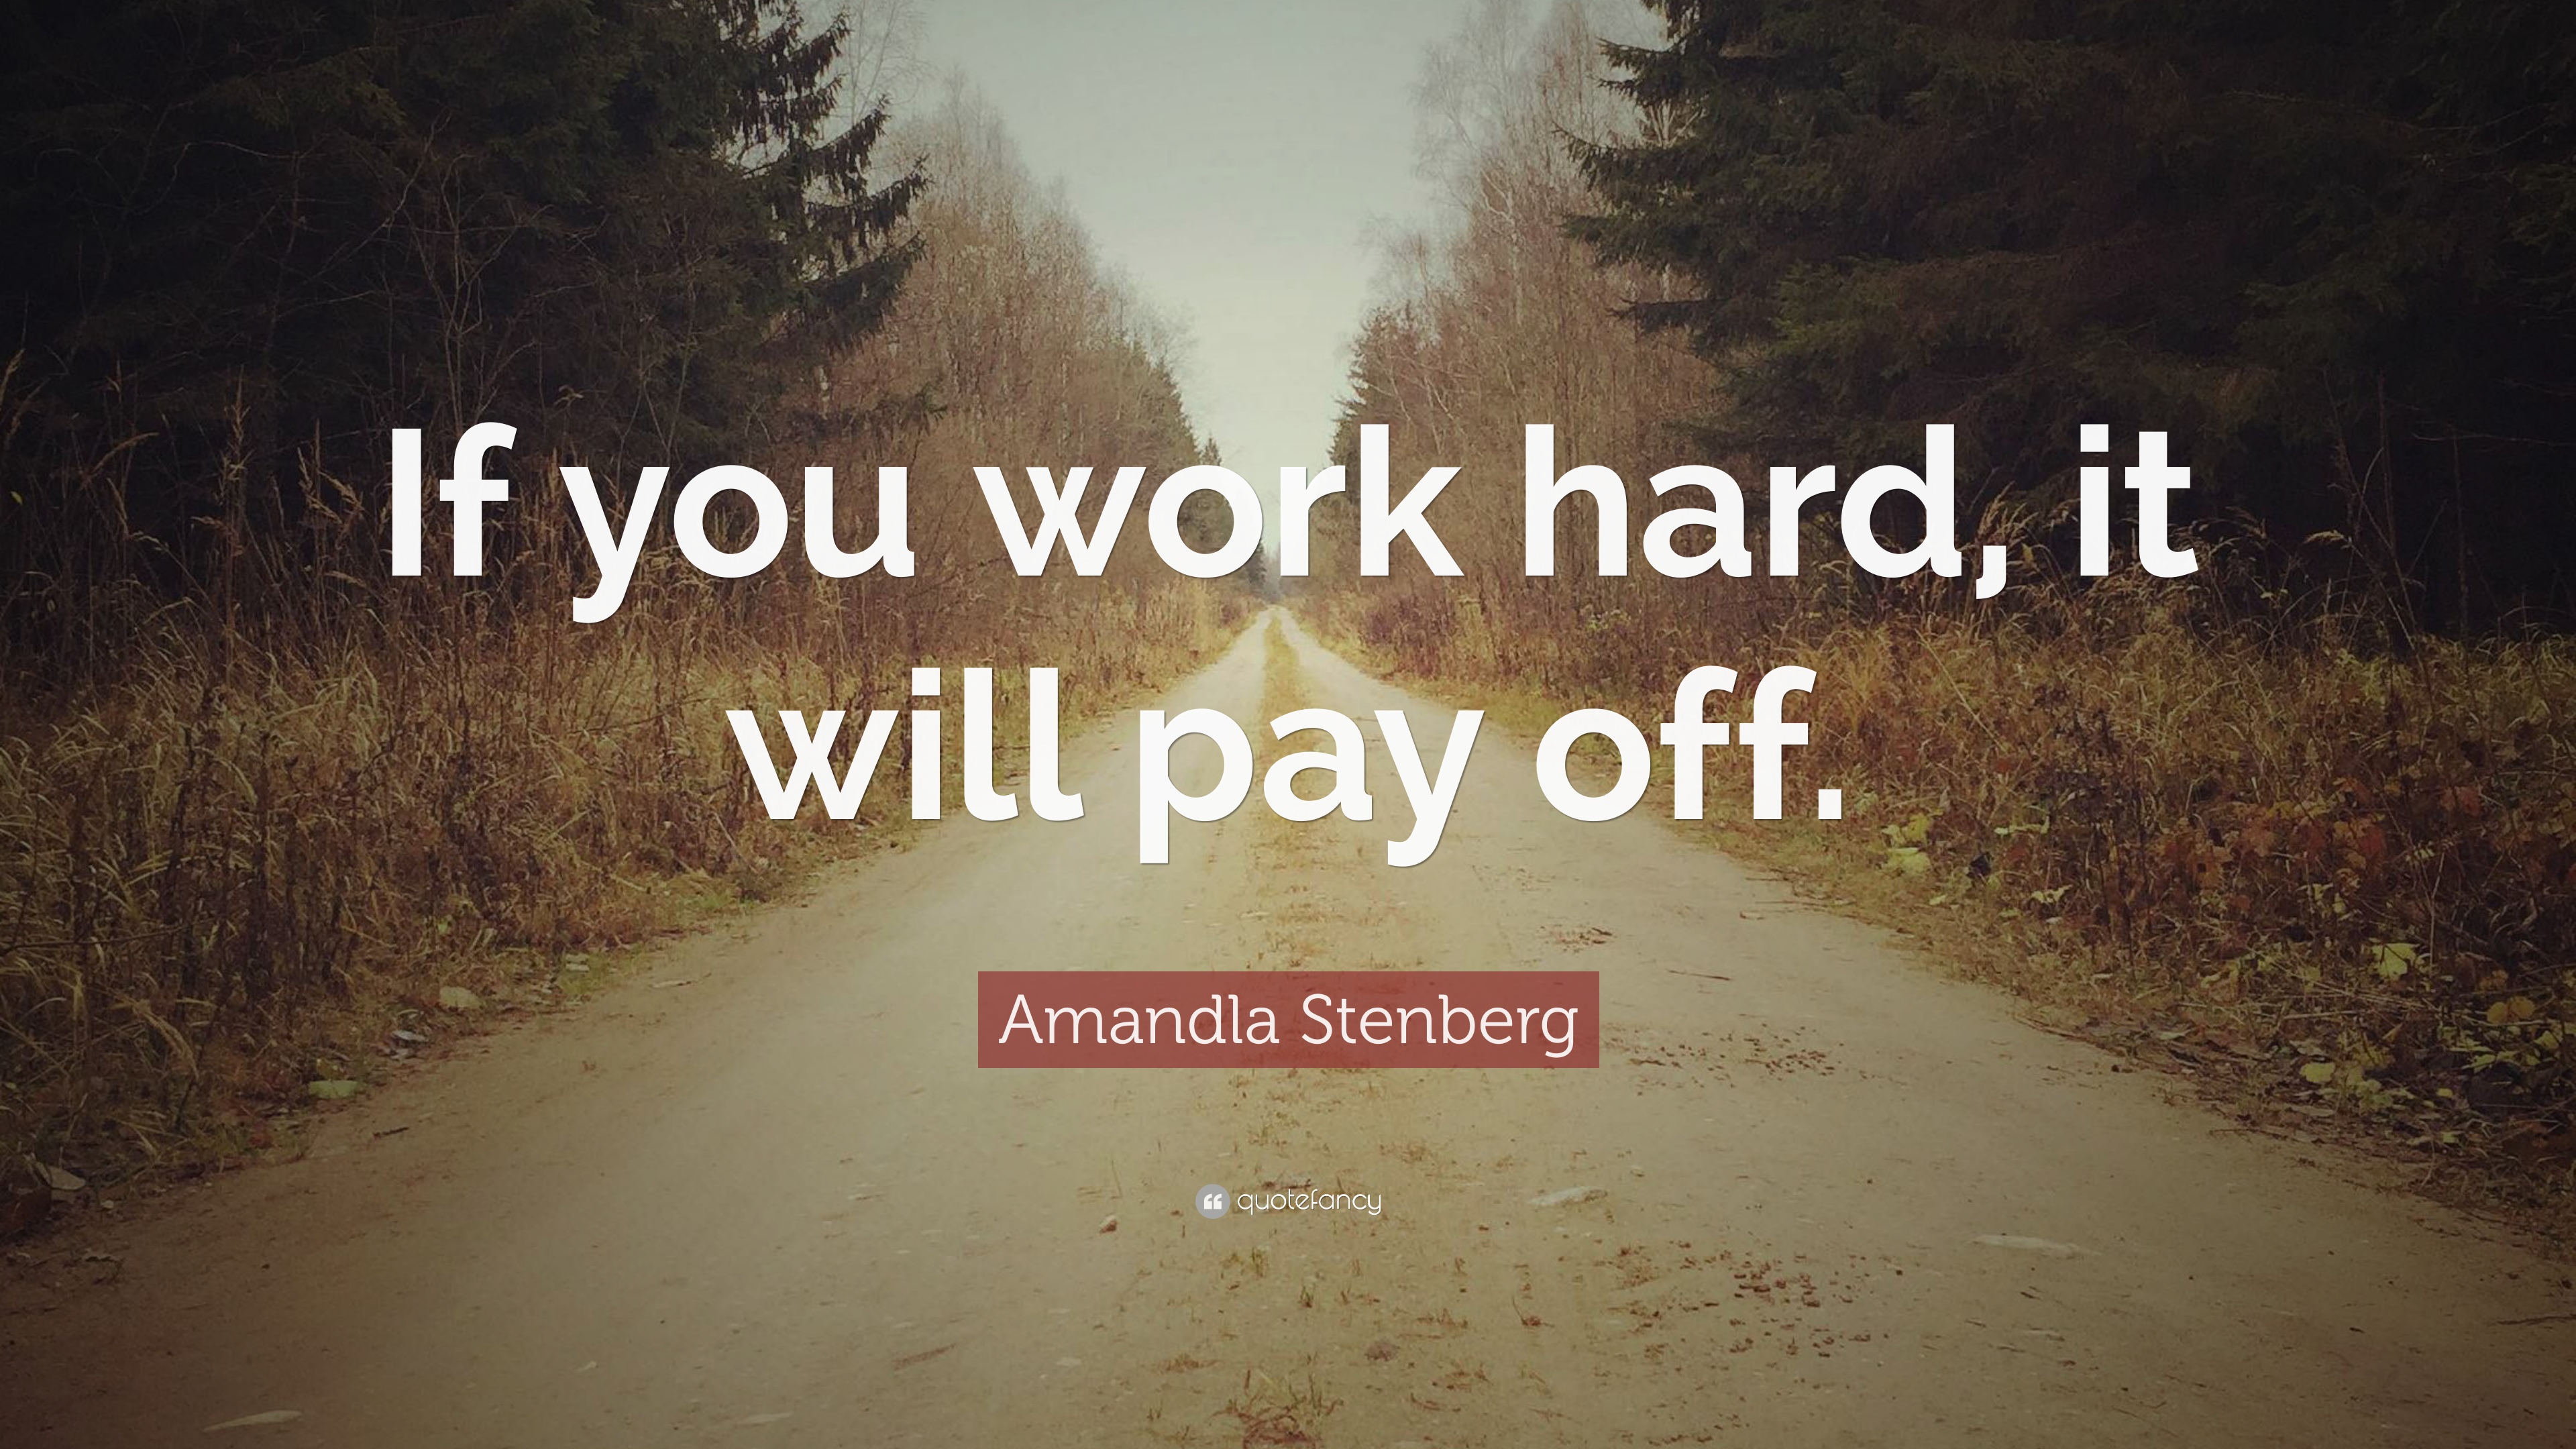 Amandla Stenberg Quote: “If you work hard, it will pay off.”